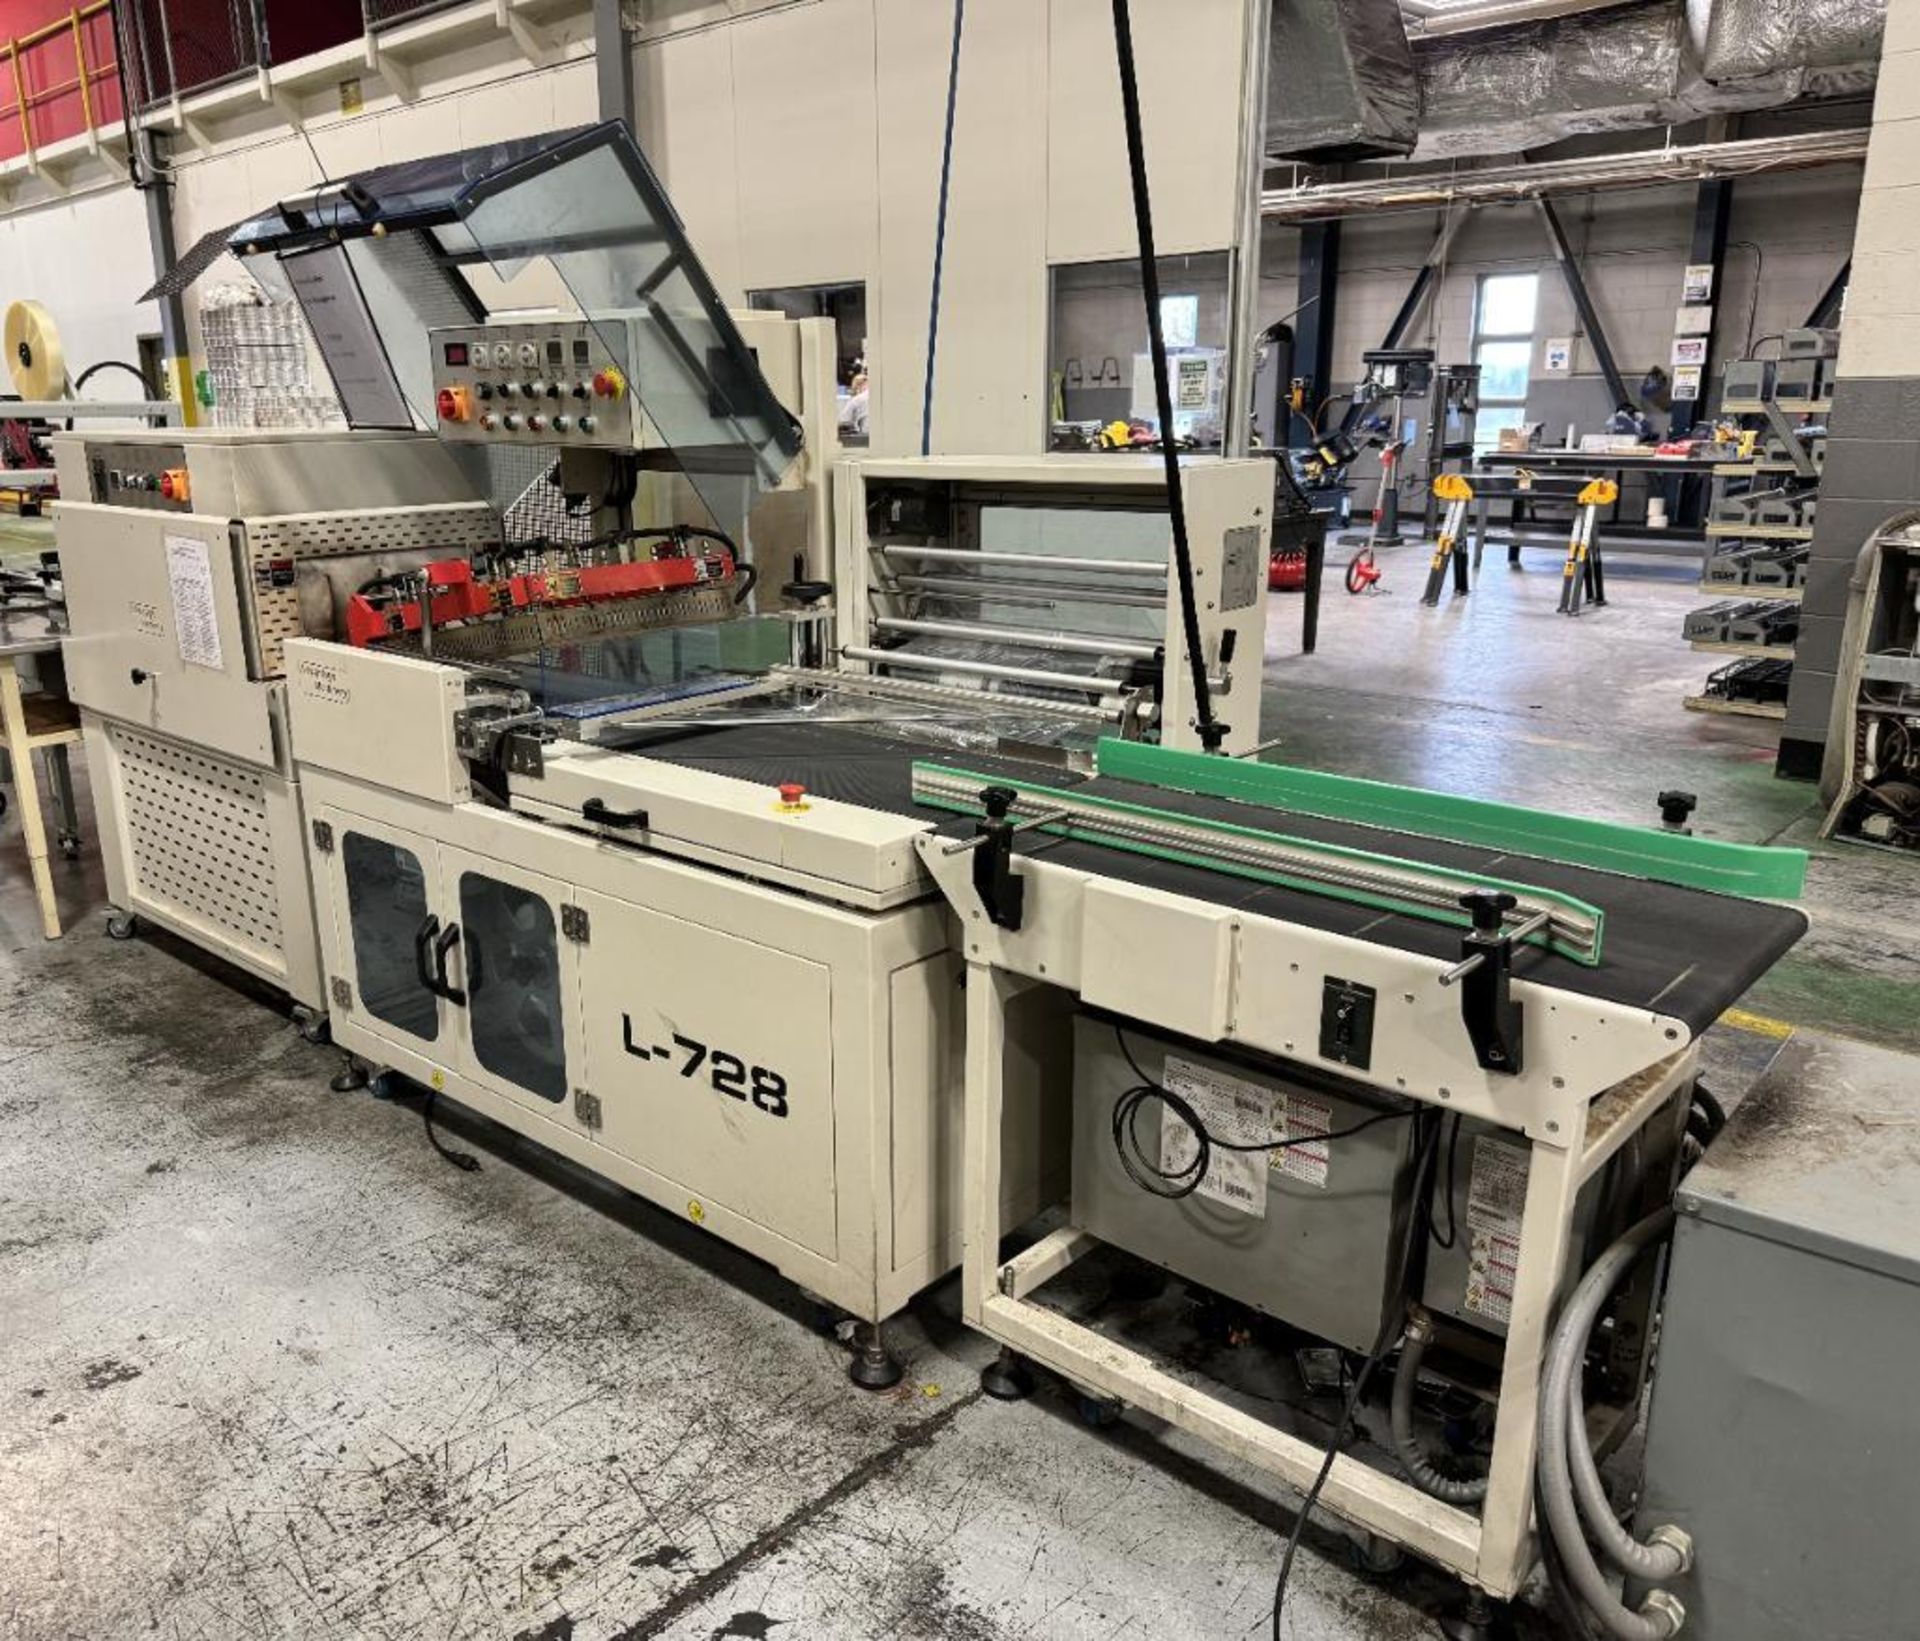 Advantage Machinery L-728 L-Bar Sealing Machine, Serial# 19-001156B, Built 2019. With belted conveyo - Image 5 of 18